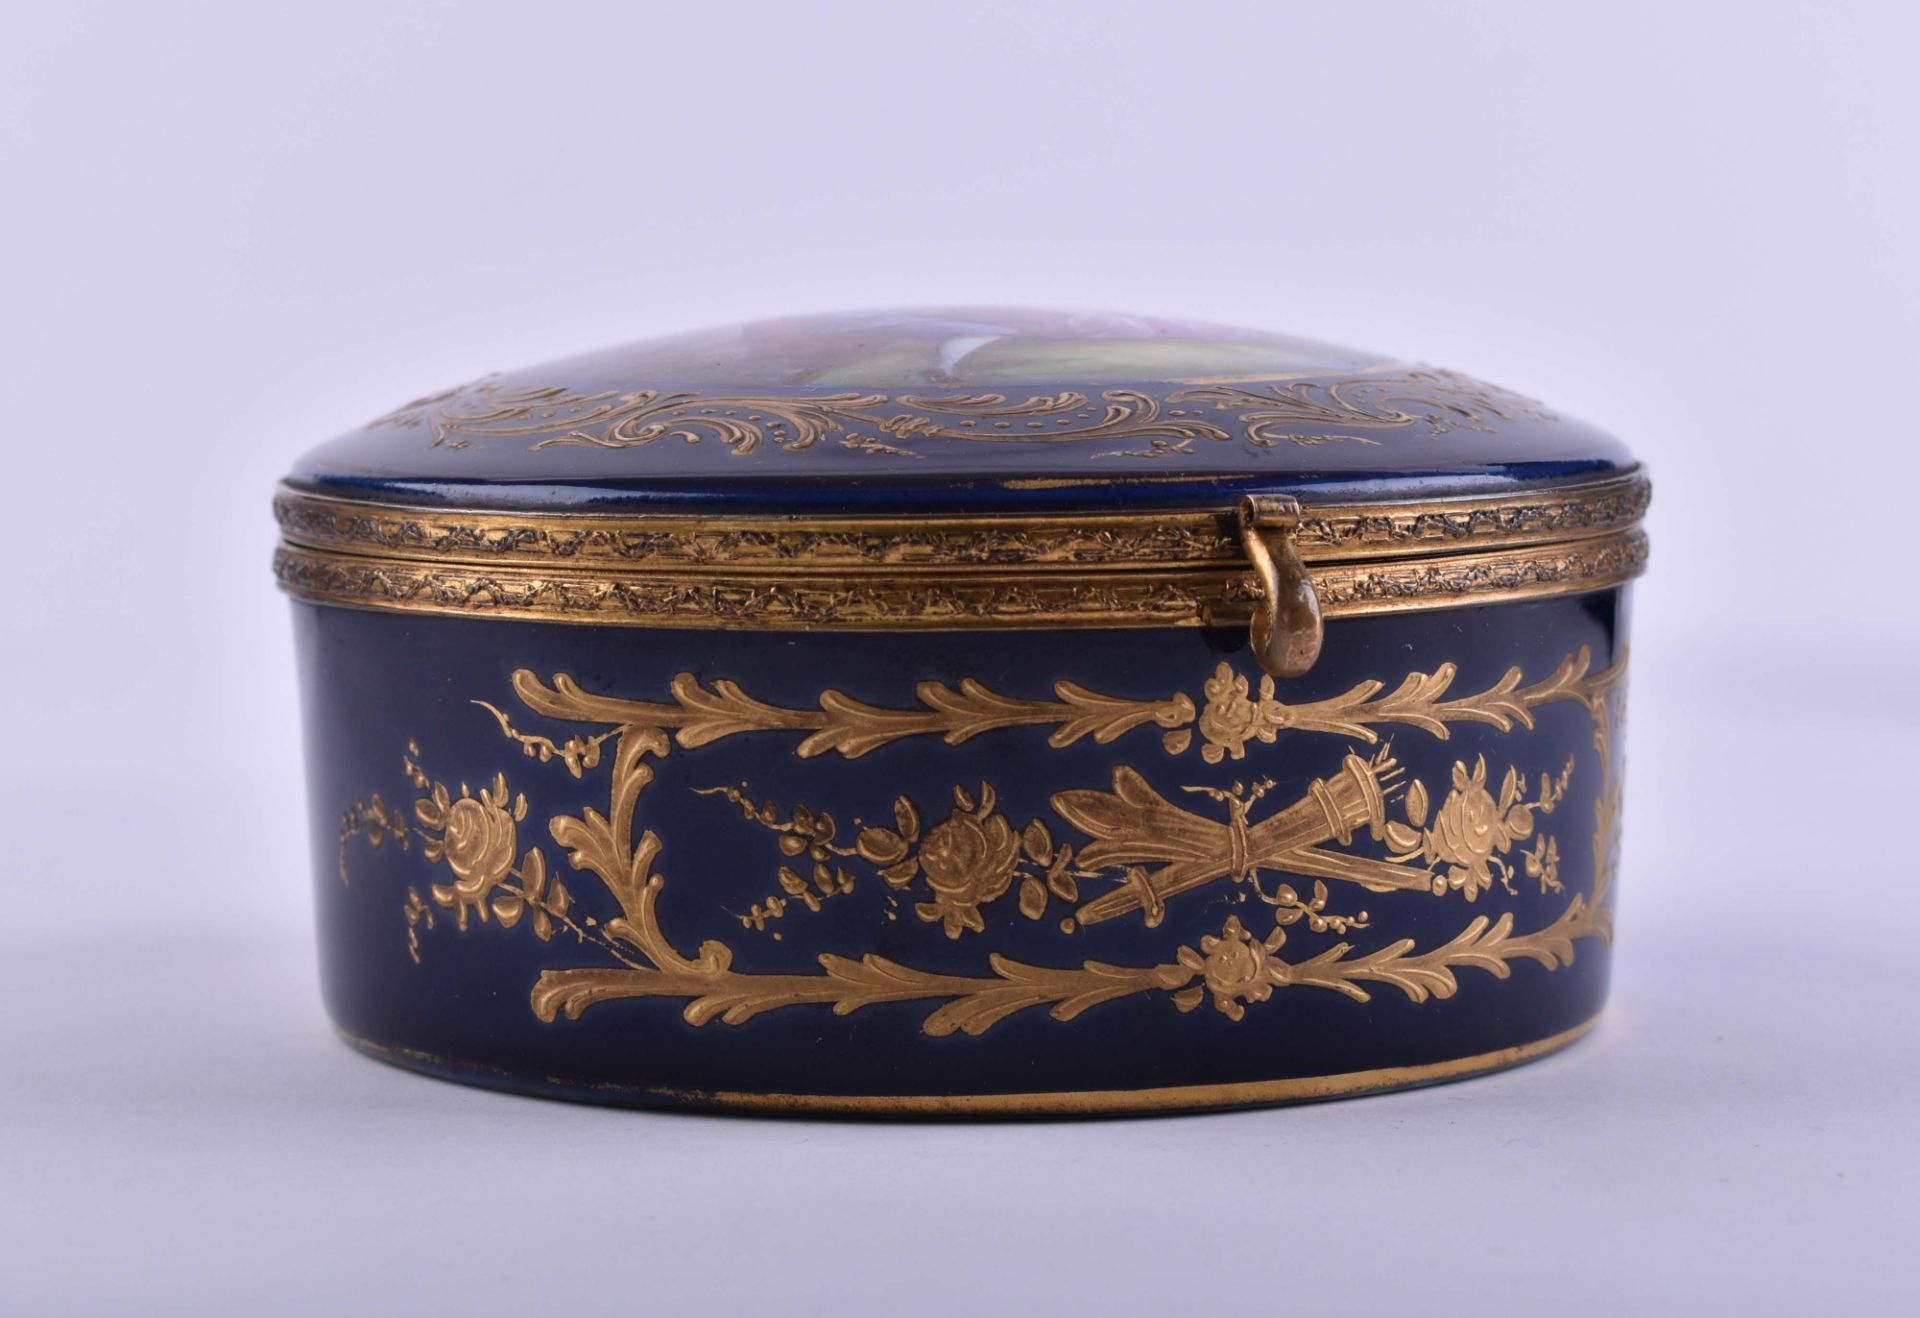  Porcelain cover box Sevres - Image 4 of 7